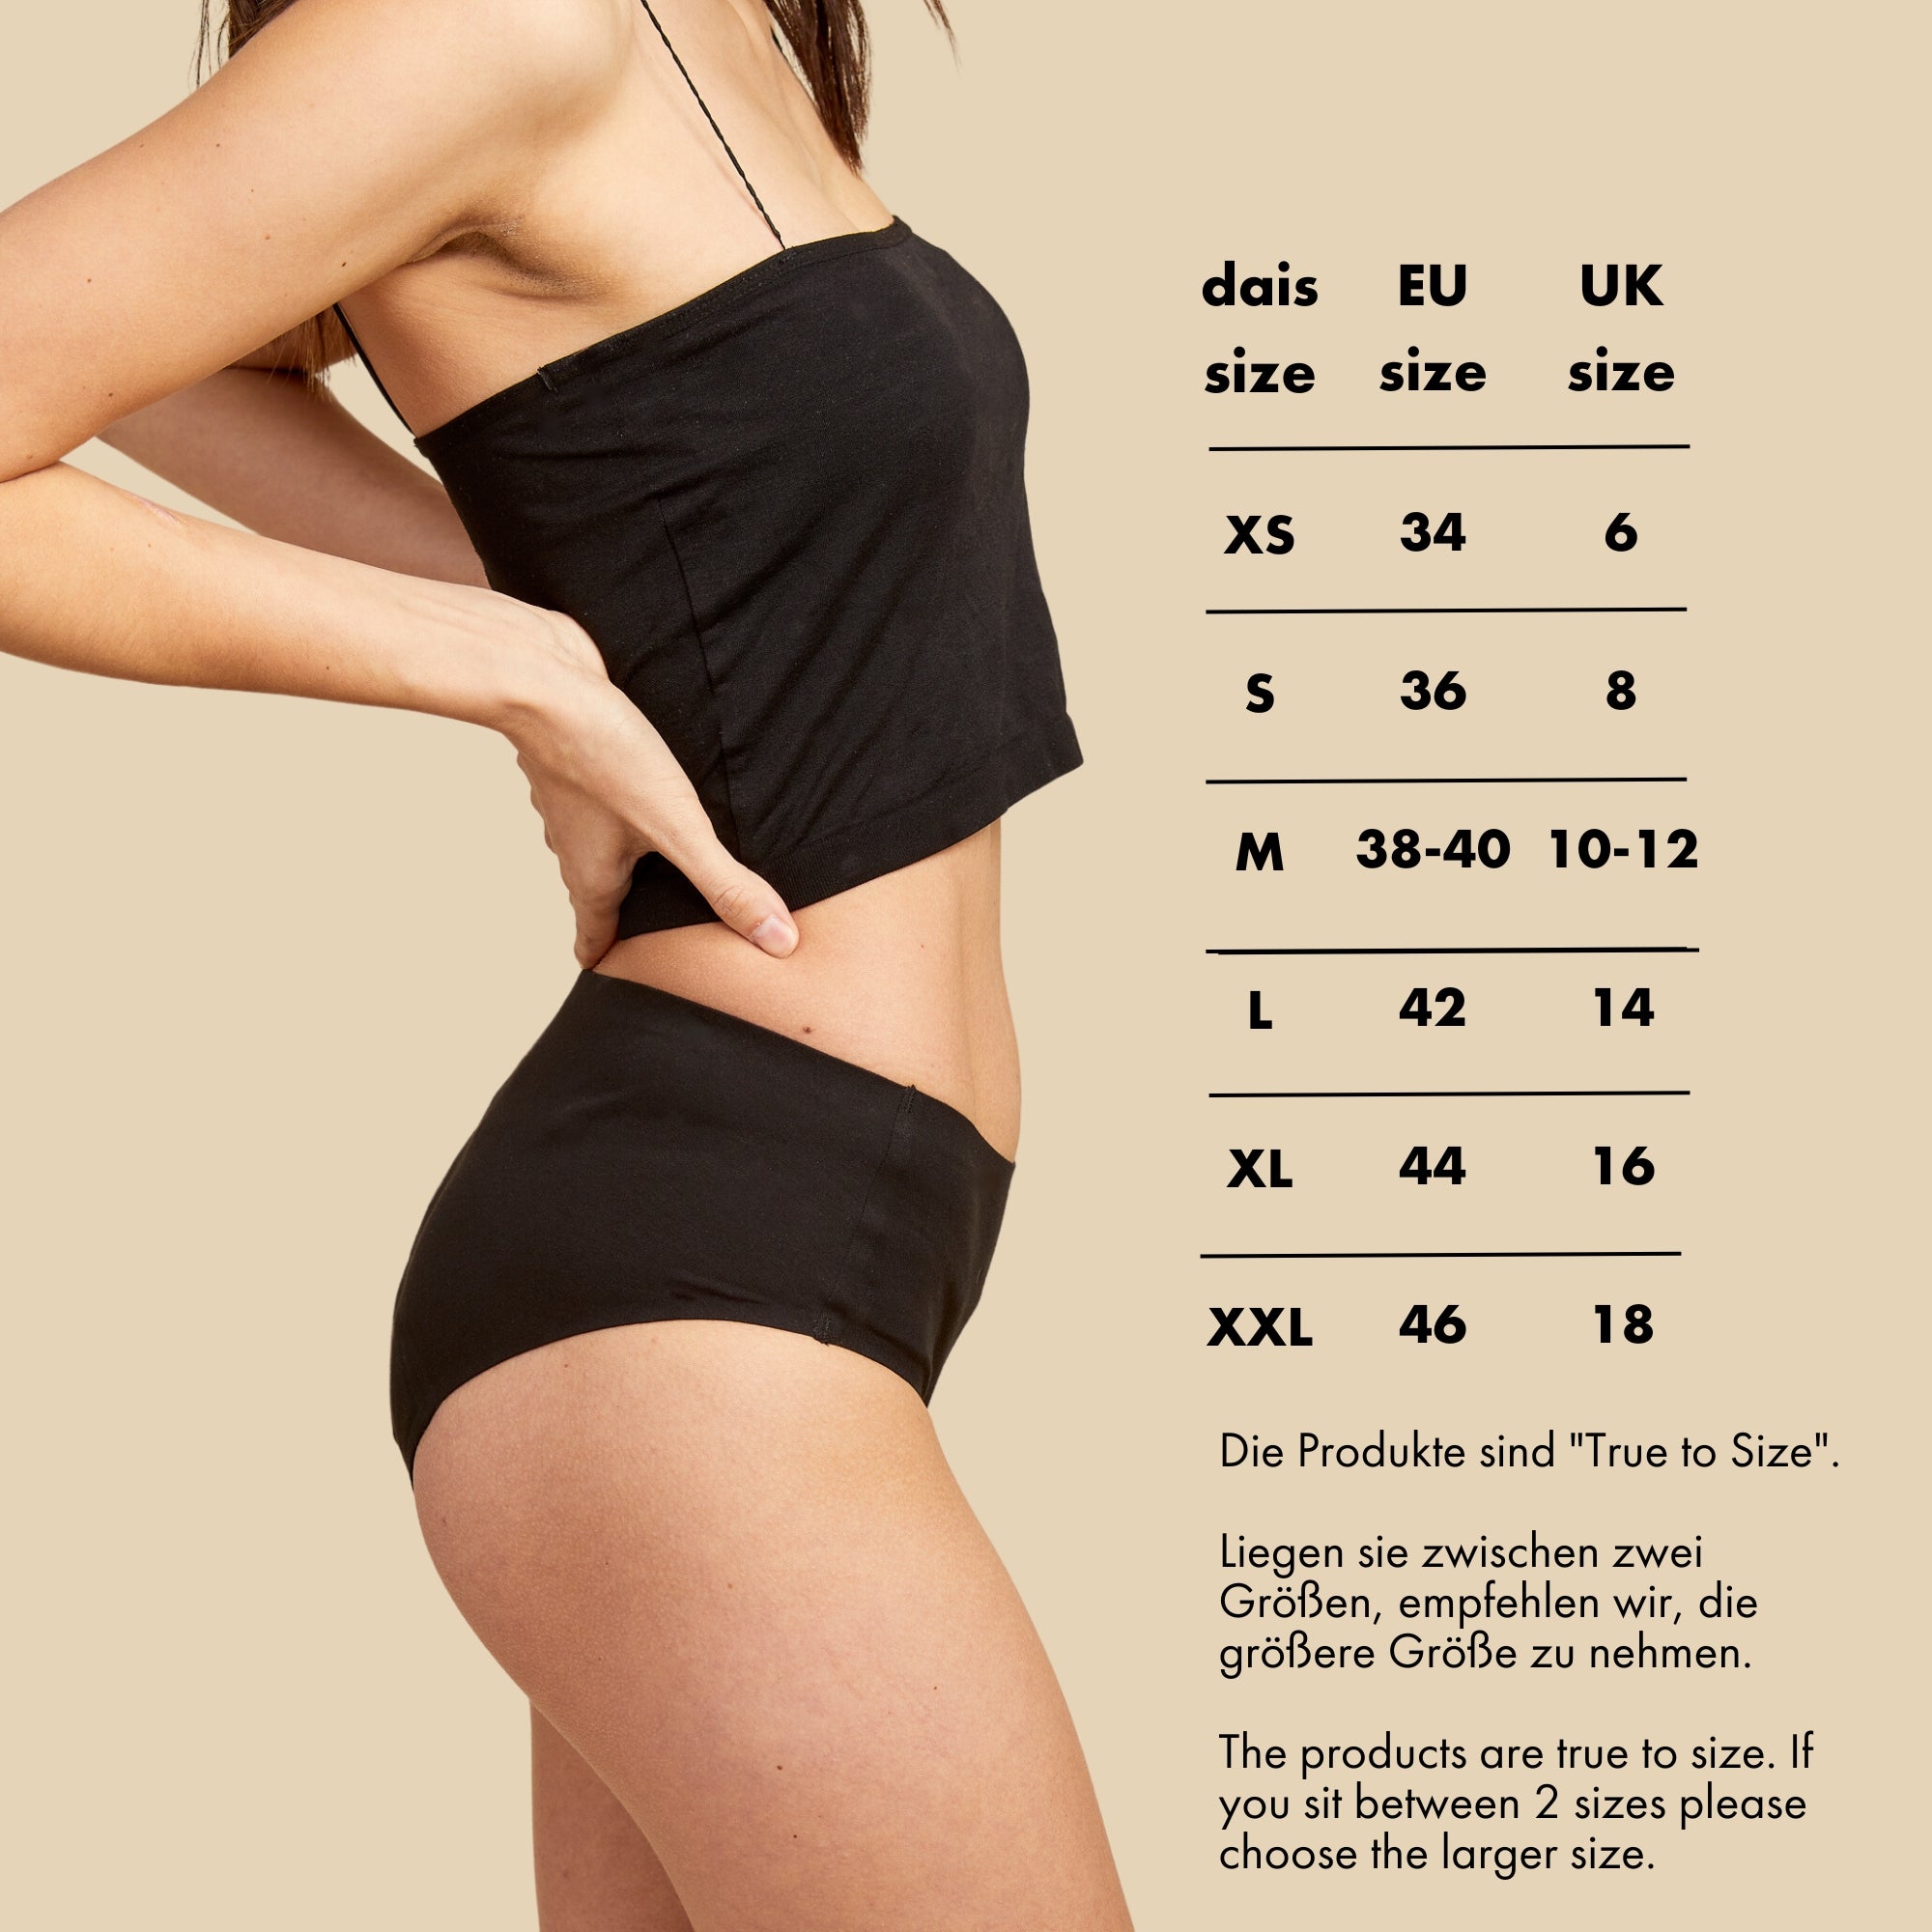 Size chart for dais period underwear in hipster cut with options XS, S, M, L, XL, XXL with EU and UK size conversions.